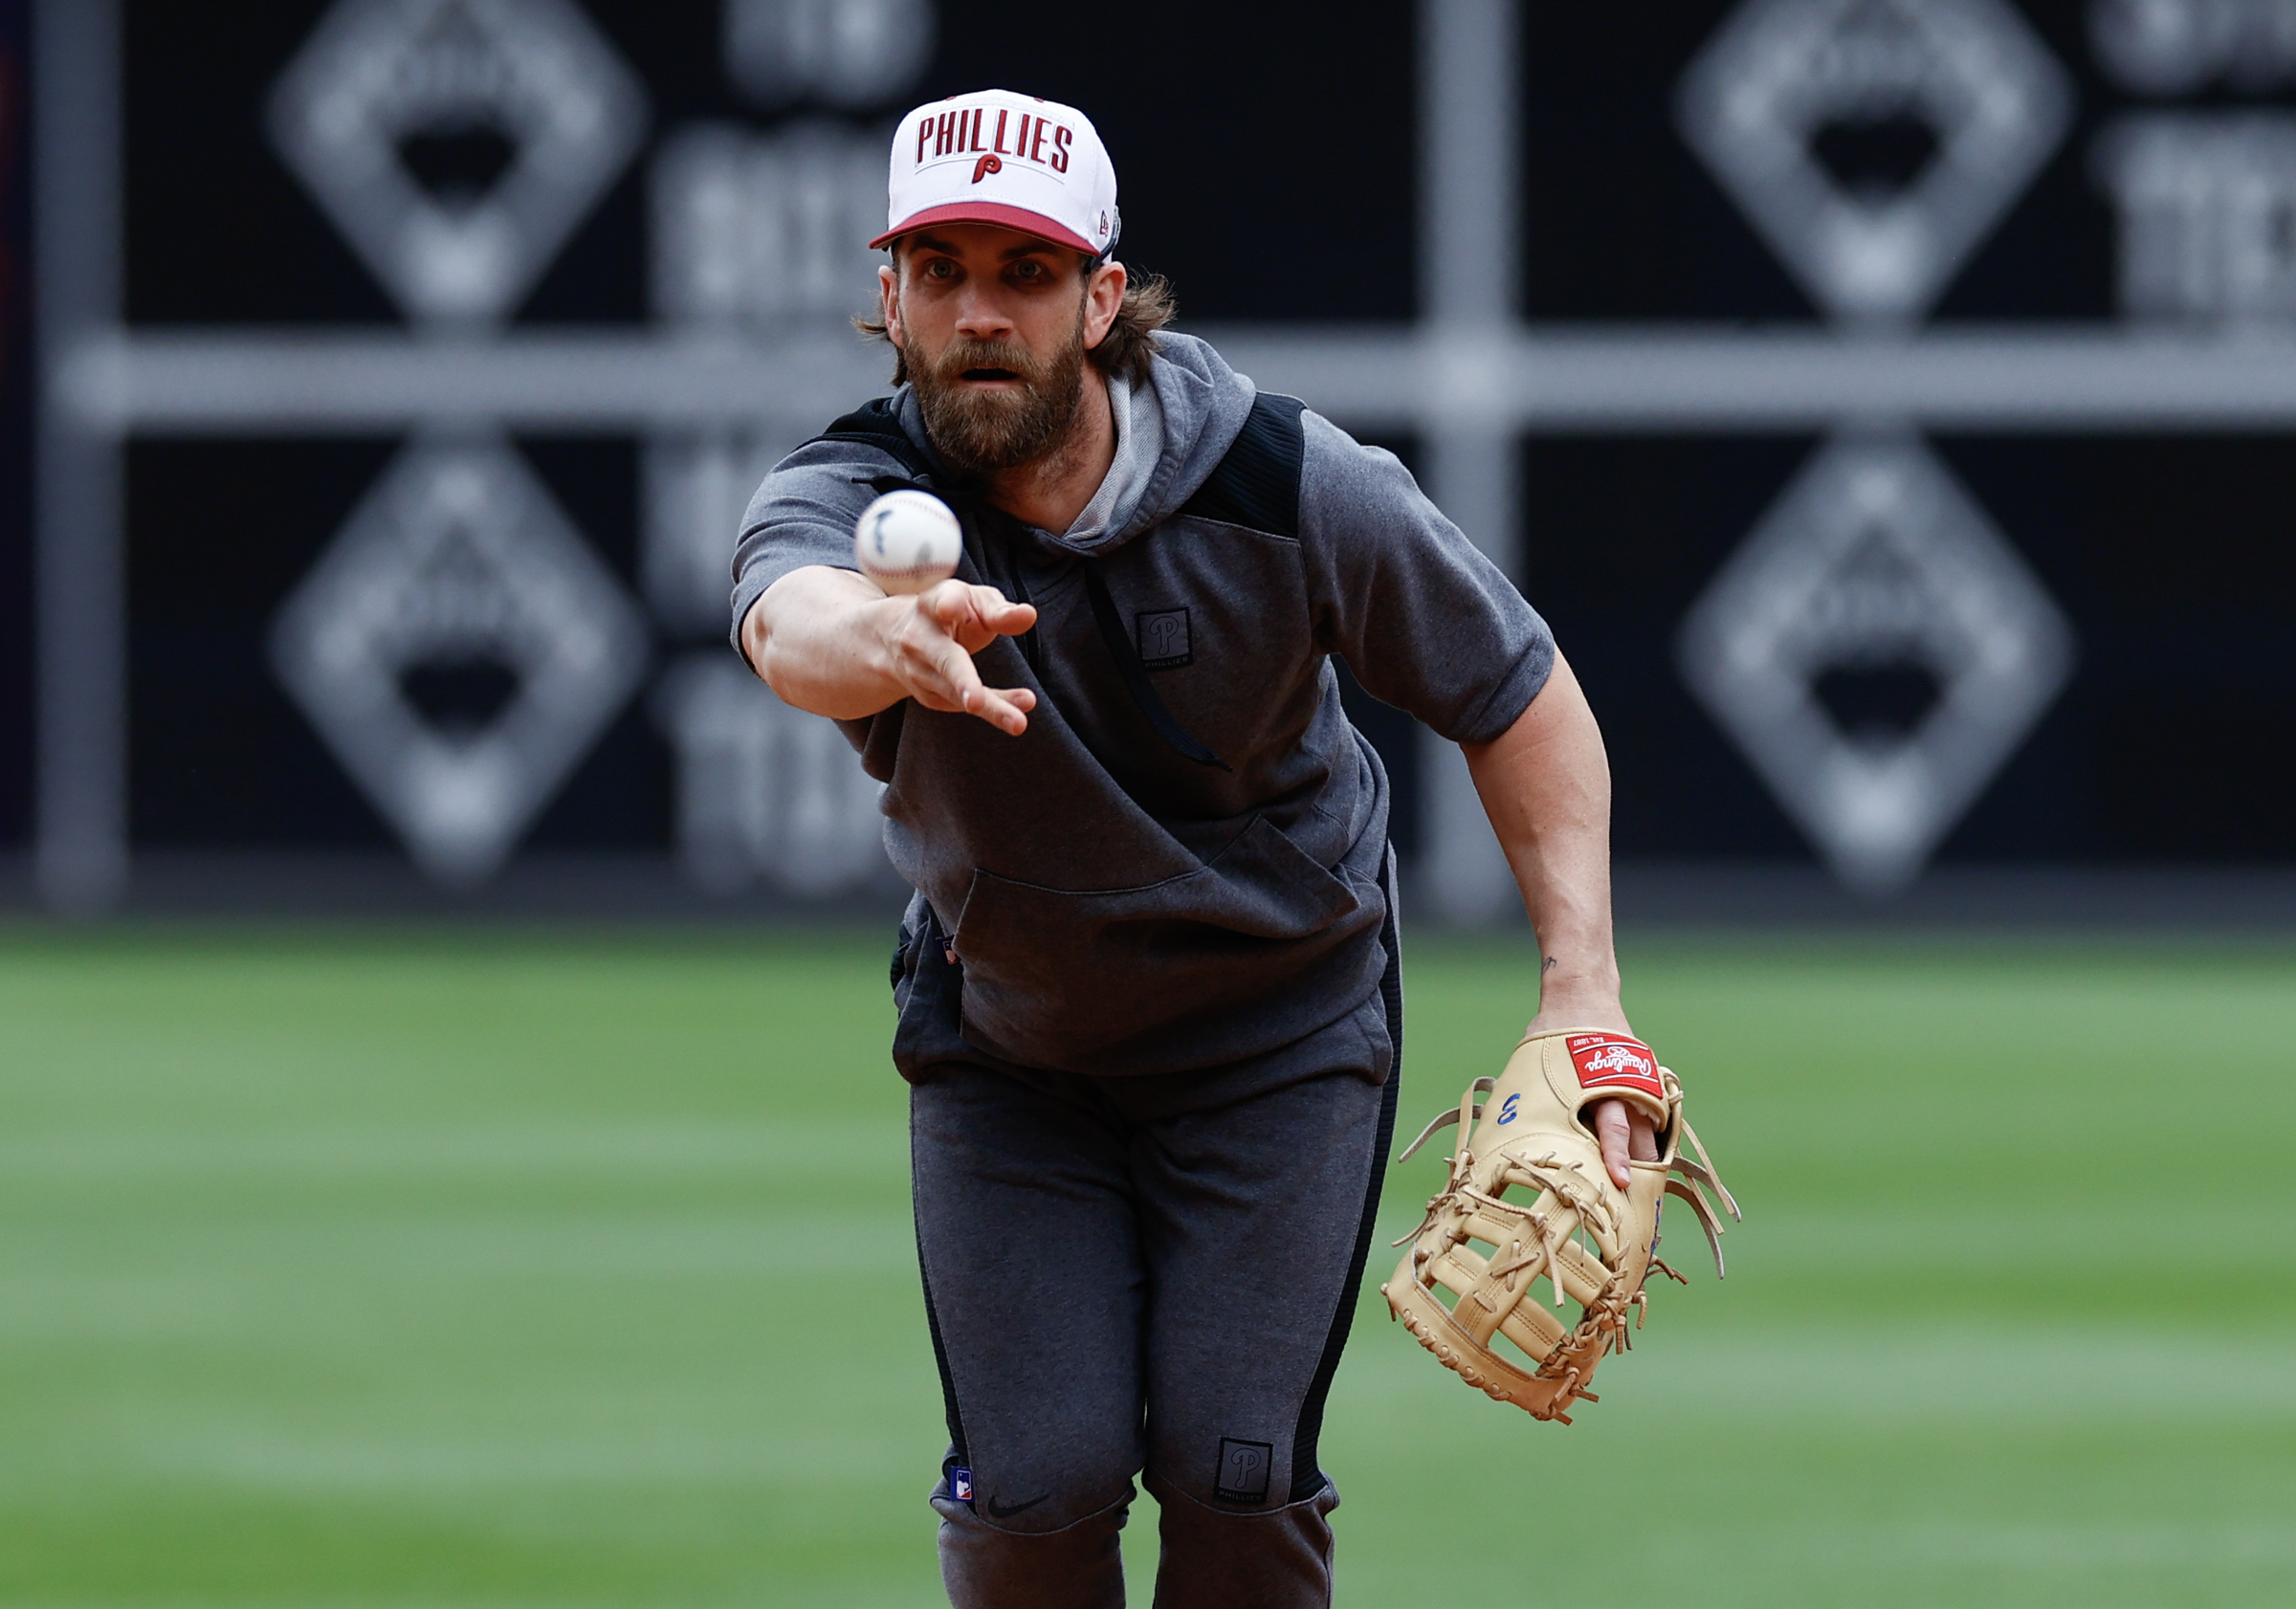 First baseman Bryce Harper of the Philadelphia Phillies can't